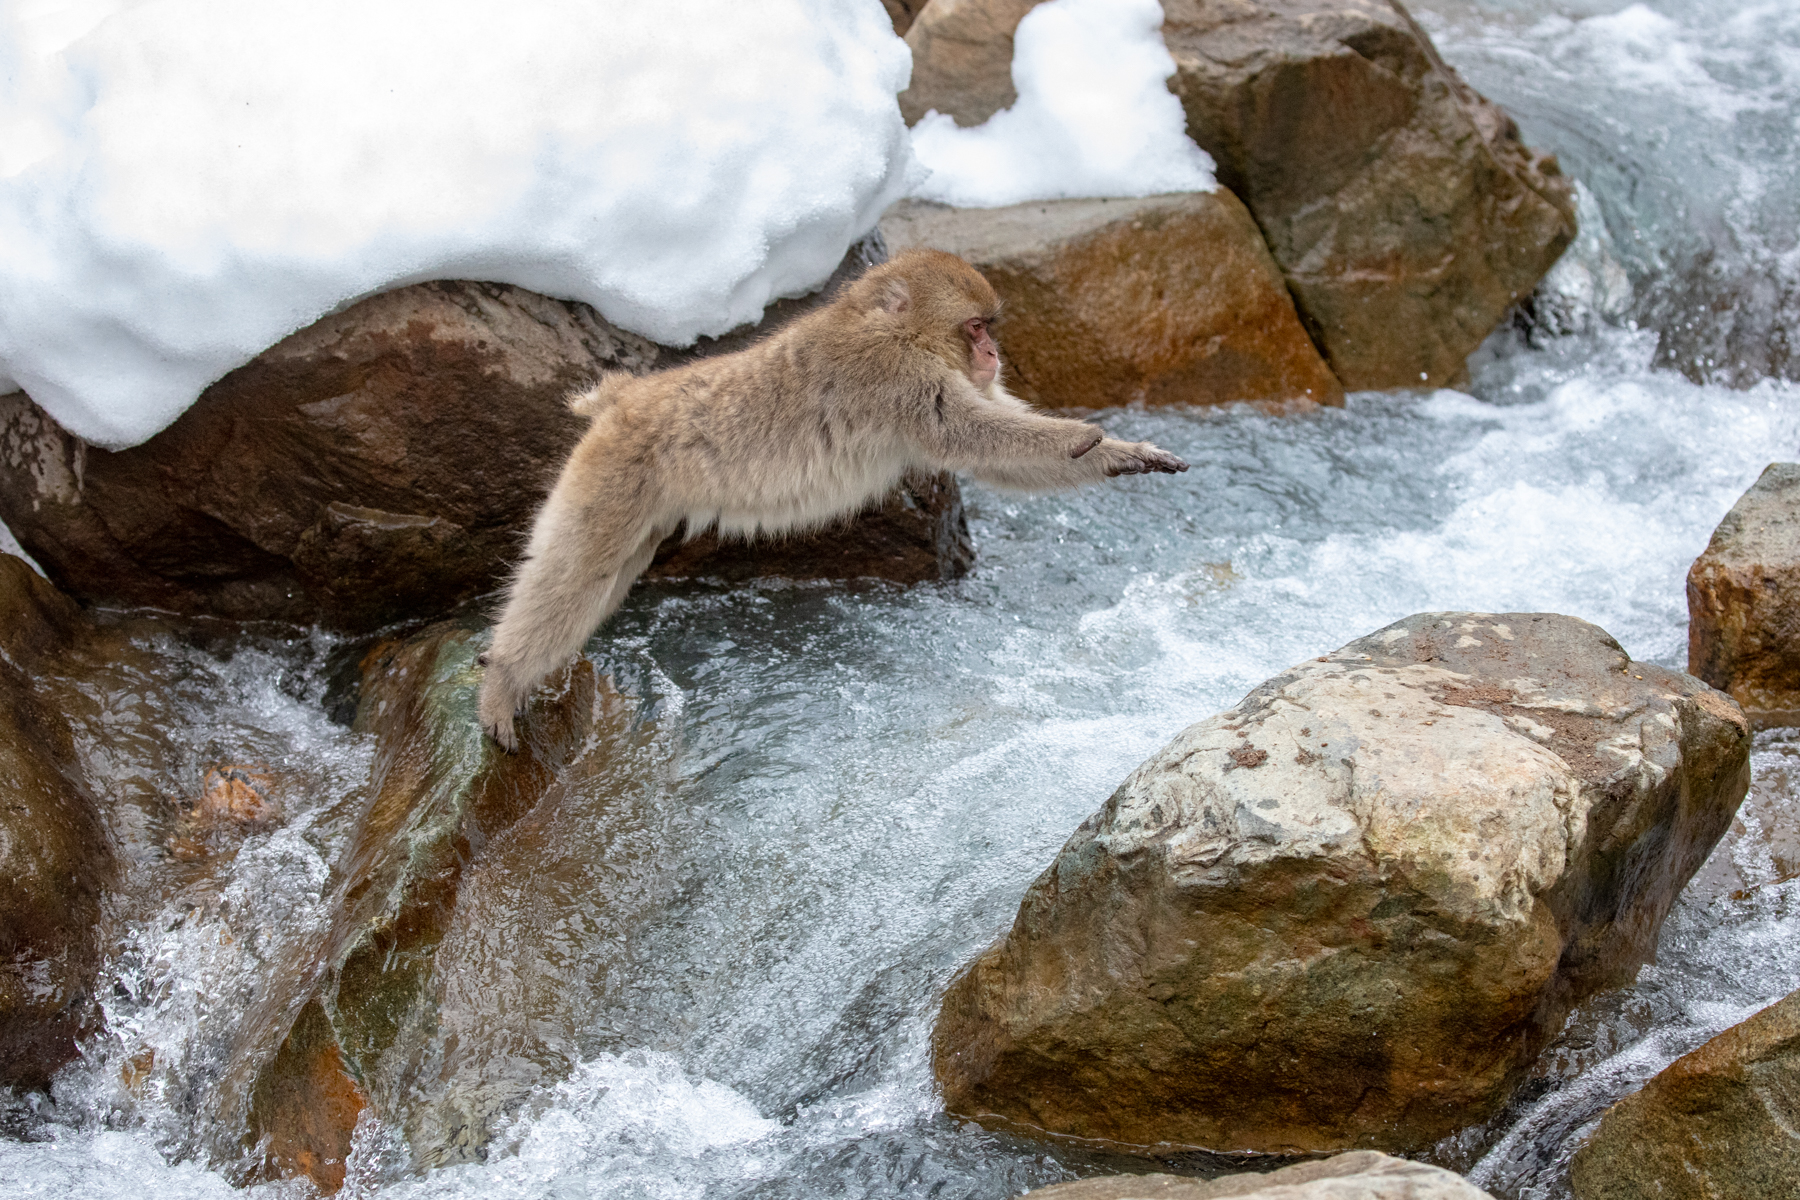 Snow Monkeys are good jumpers (image by Mark Beaman)